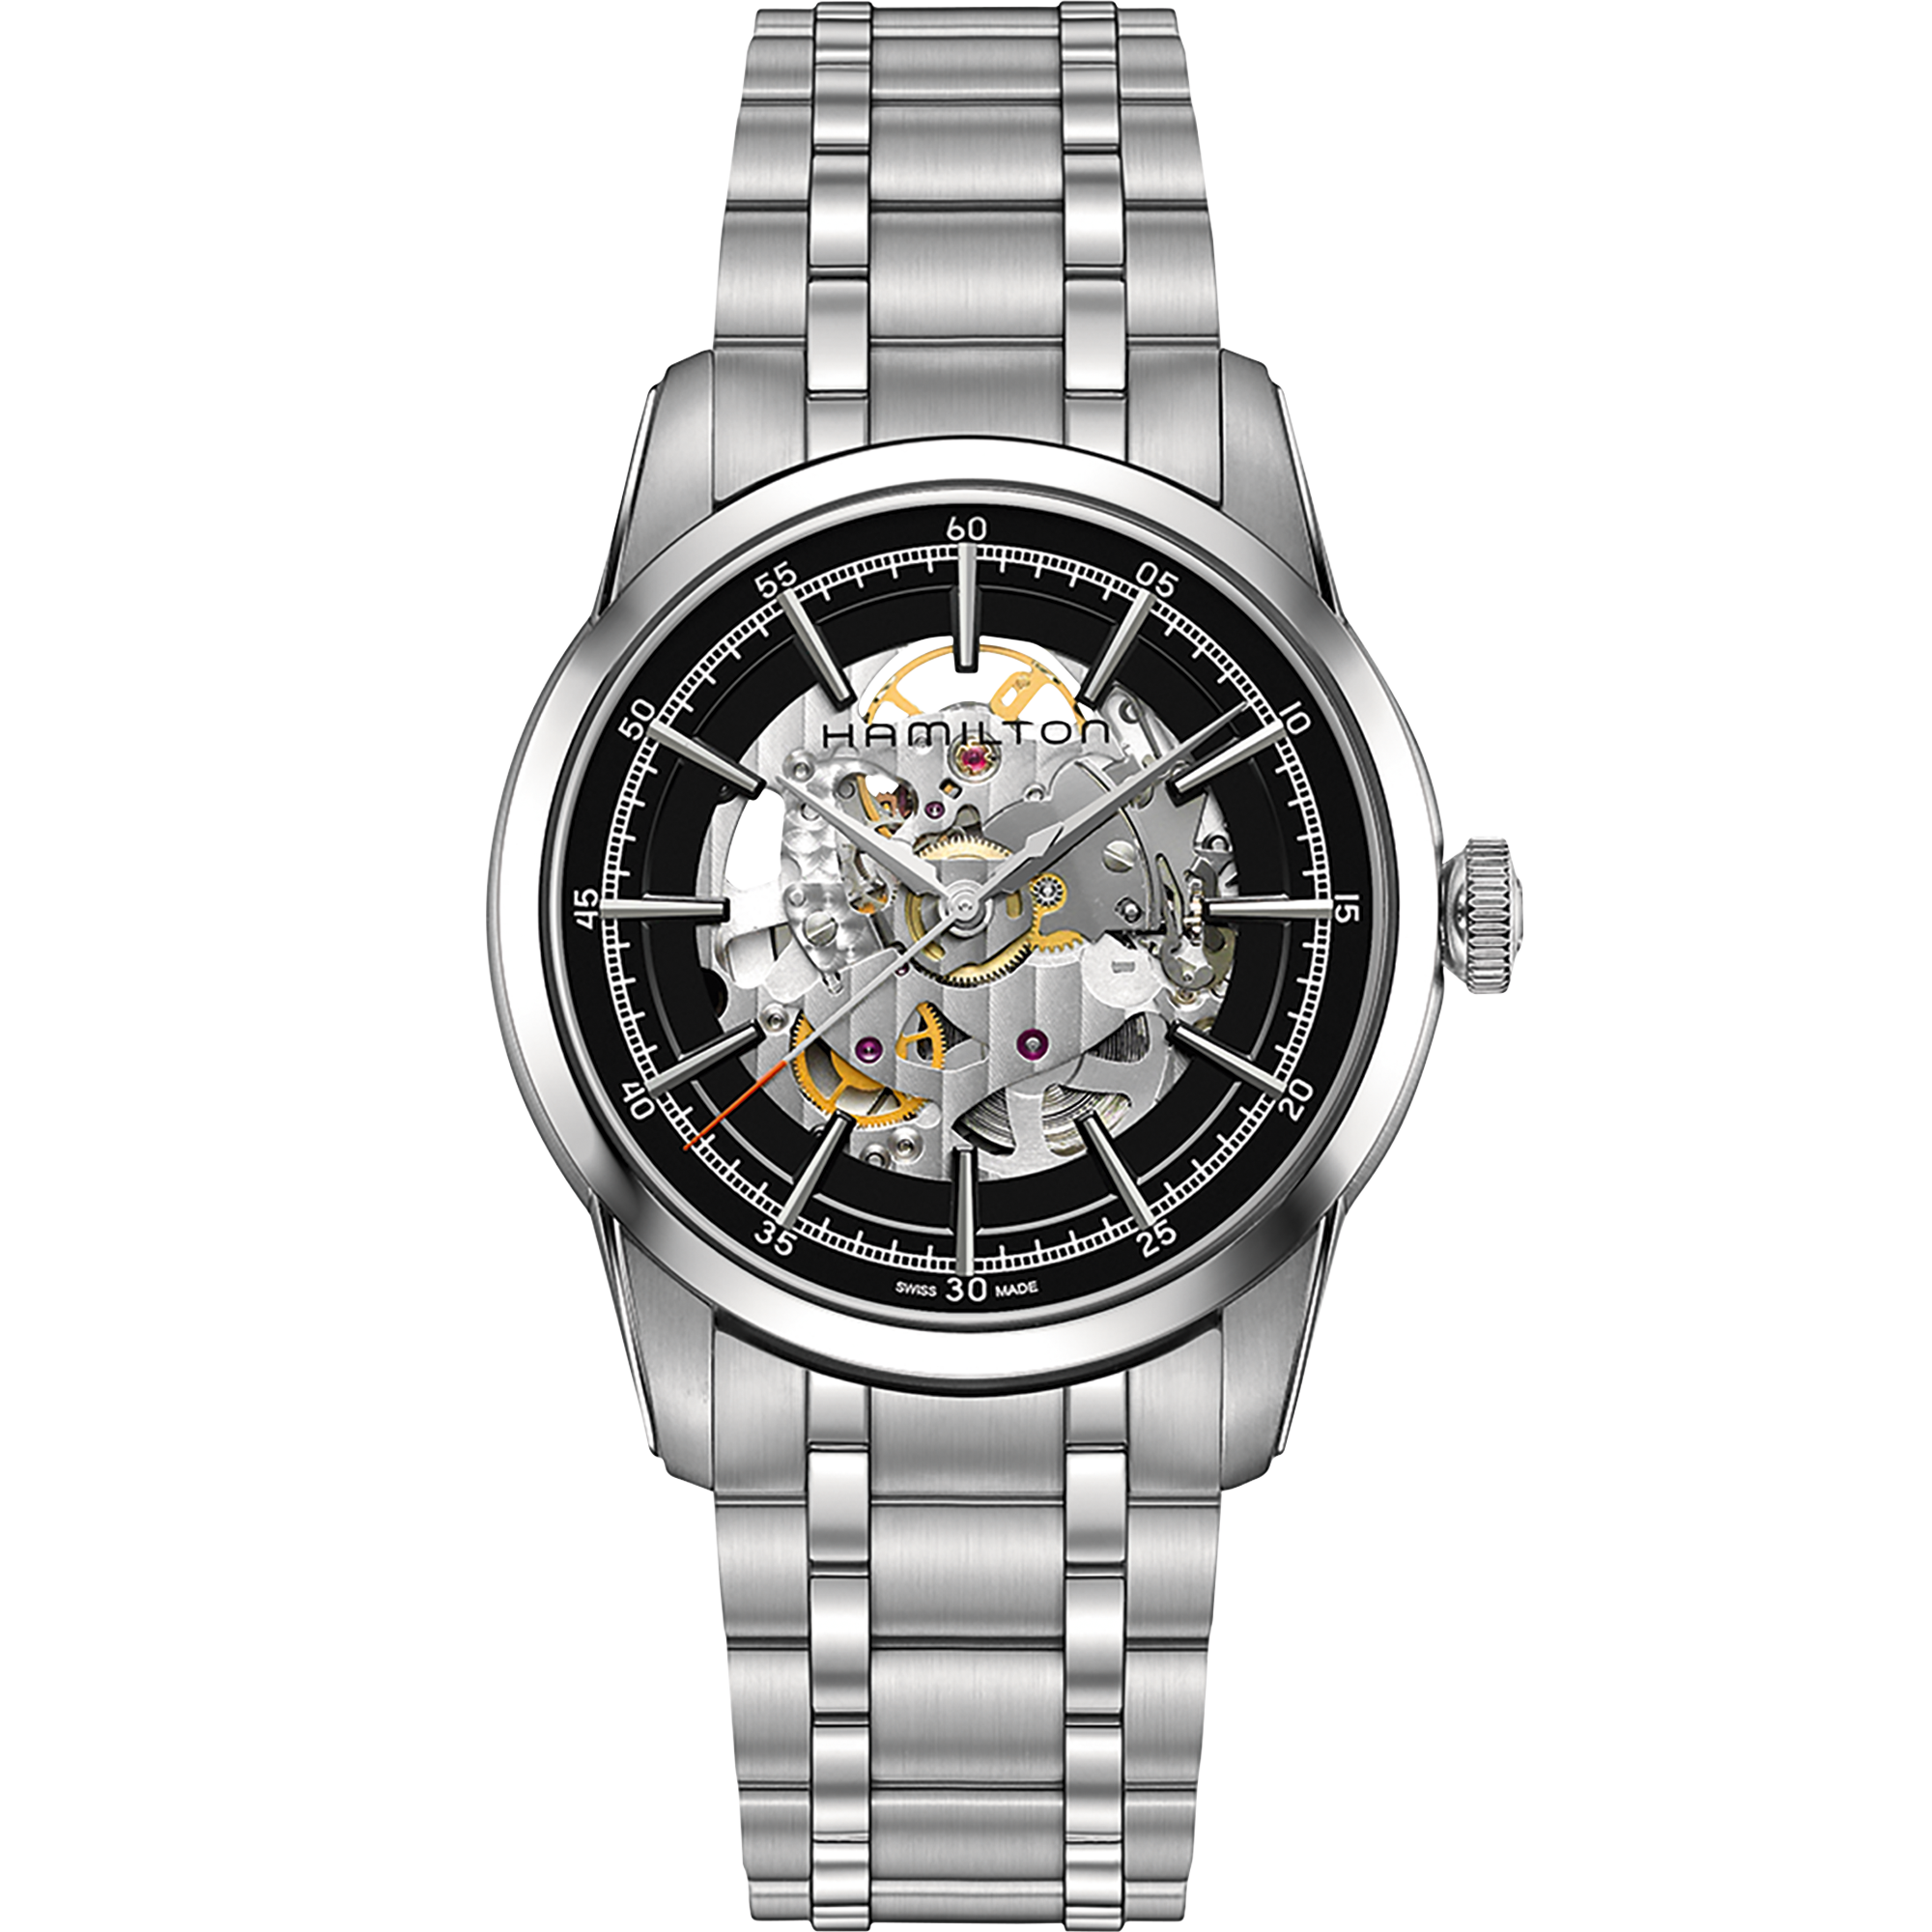 American Classic RailRoad Skeleton Automatic Watch - H40655131 